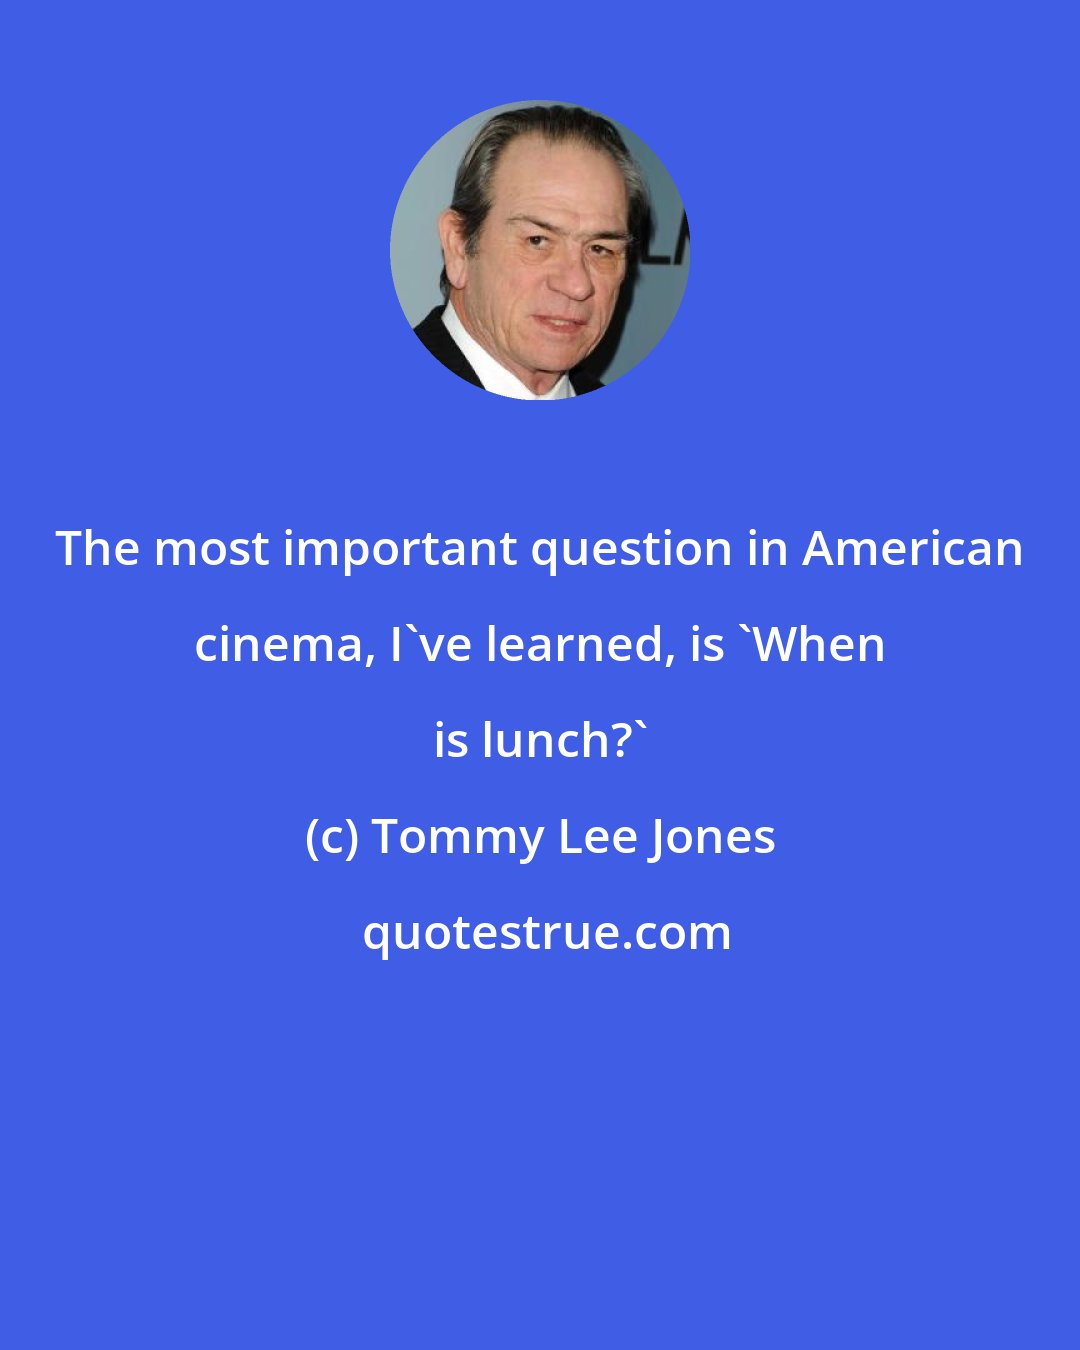 Tommy Lee Jones: The most important question in American cinema, I've learned, is 'When is lunch?'